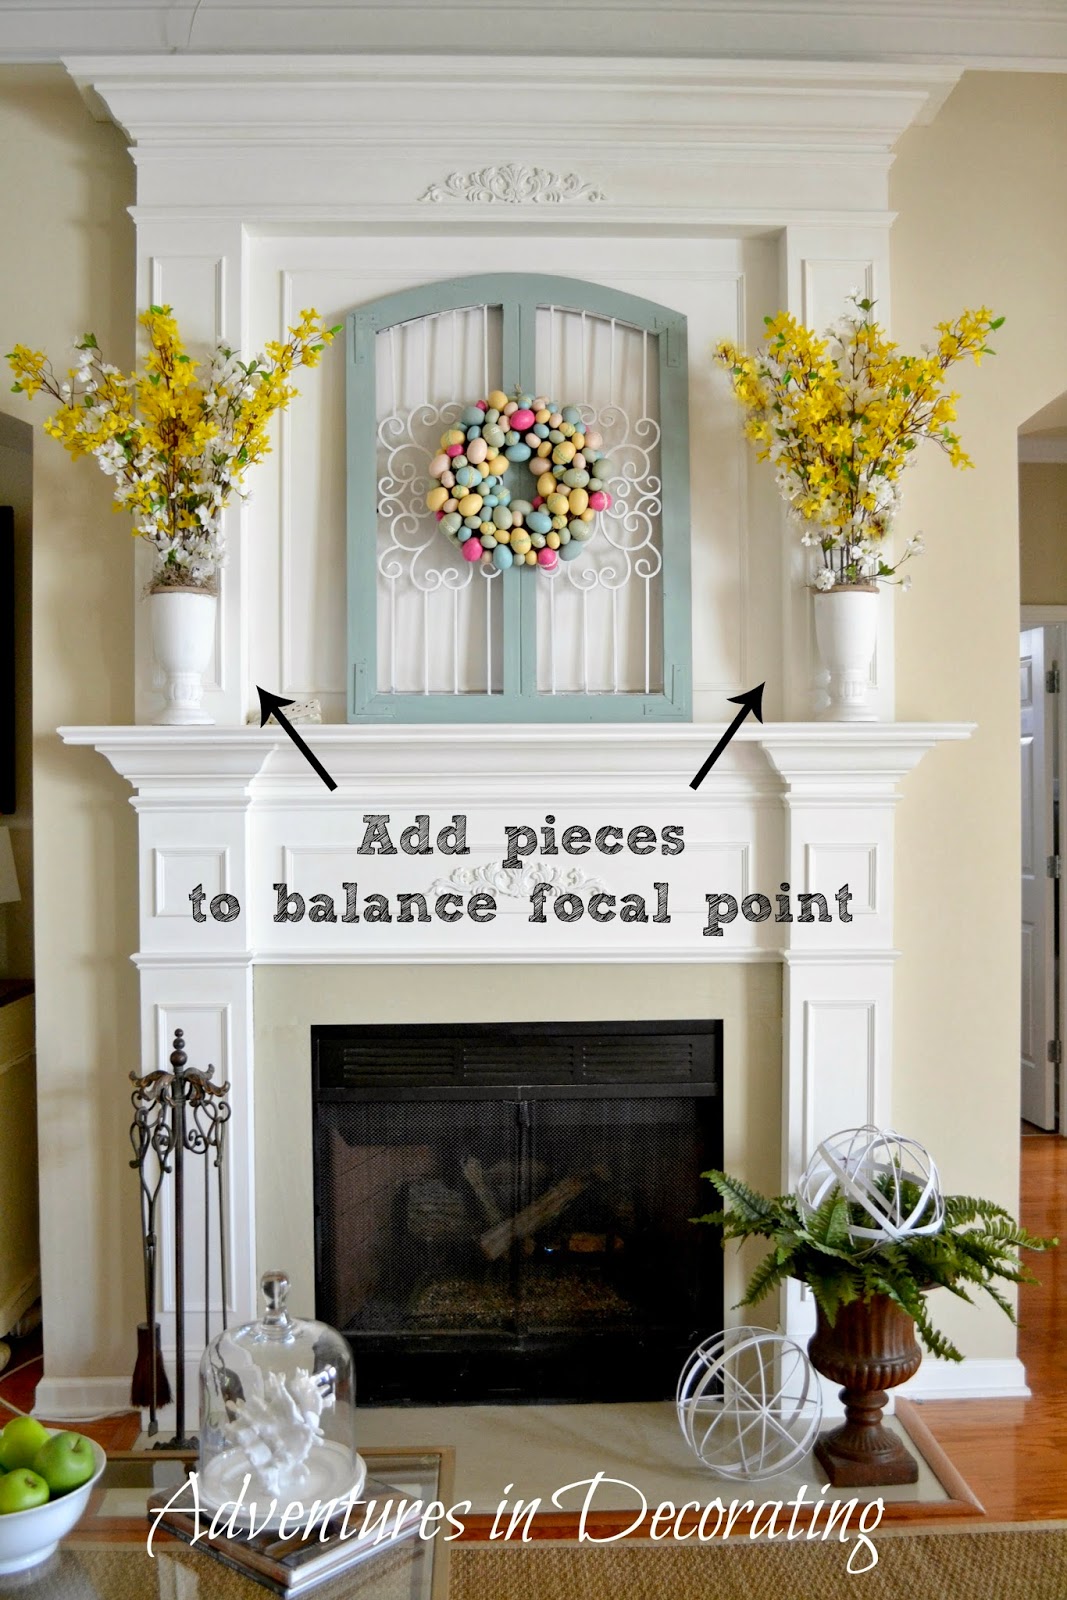 Adventures in Decorating Styling our Spring Mantel